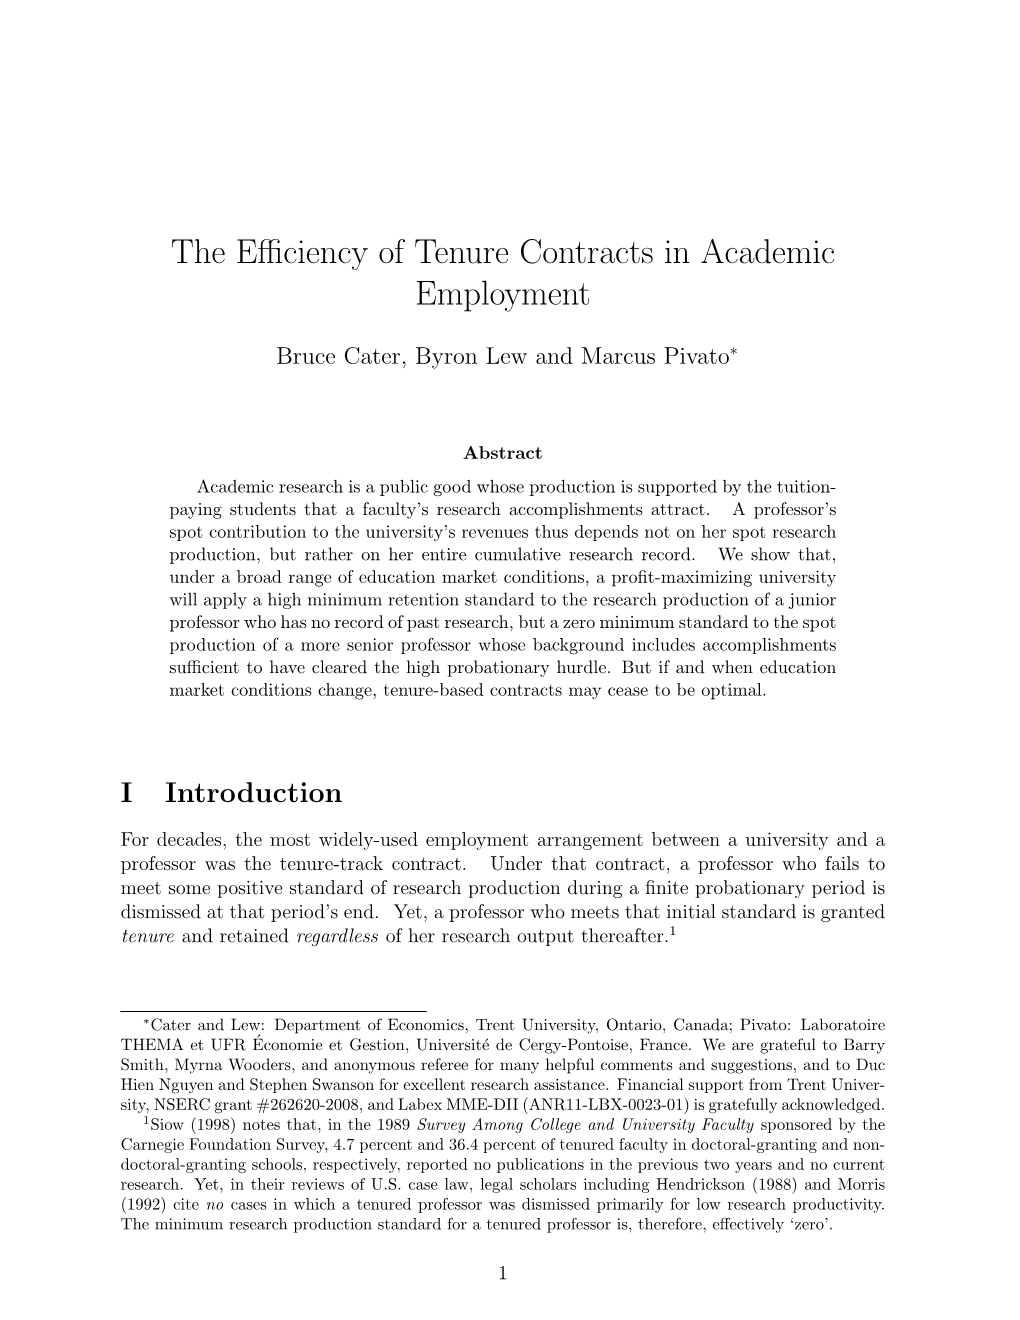 The Efficiency of Tenure Contracts in Academic Employment